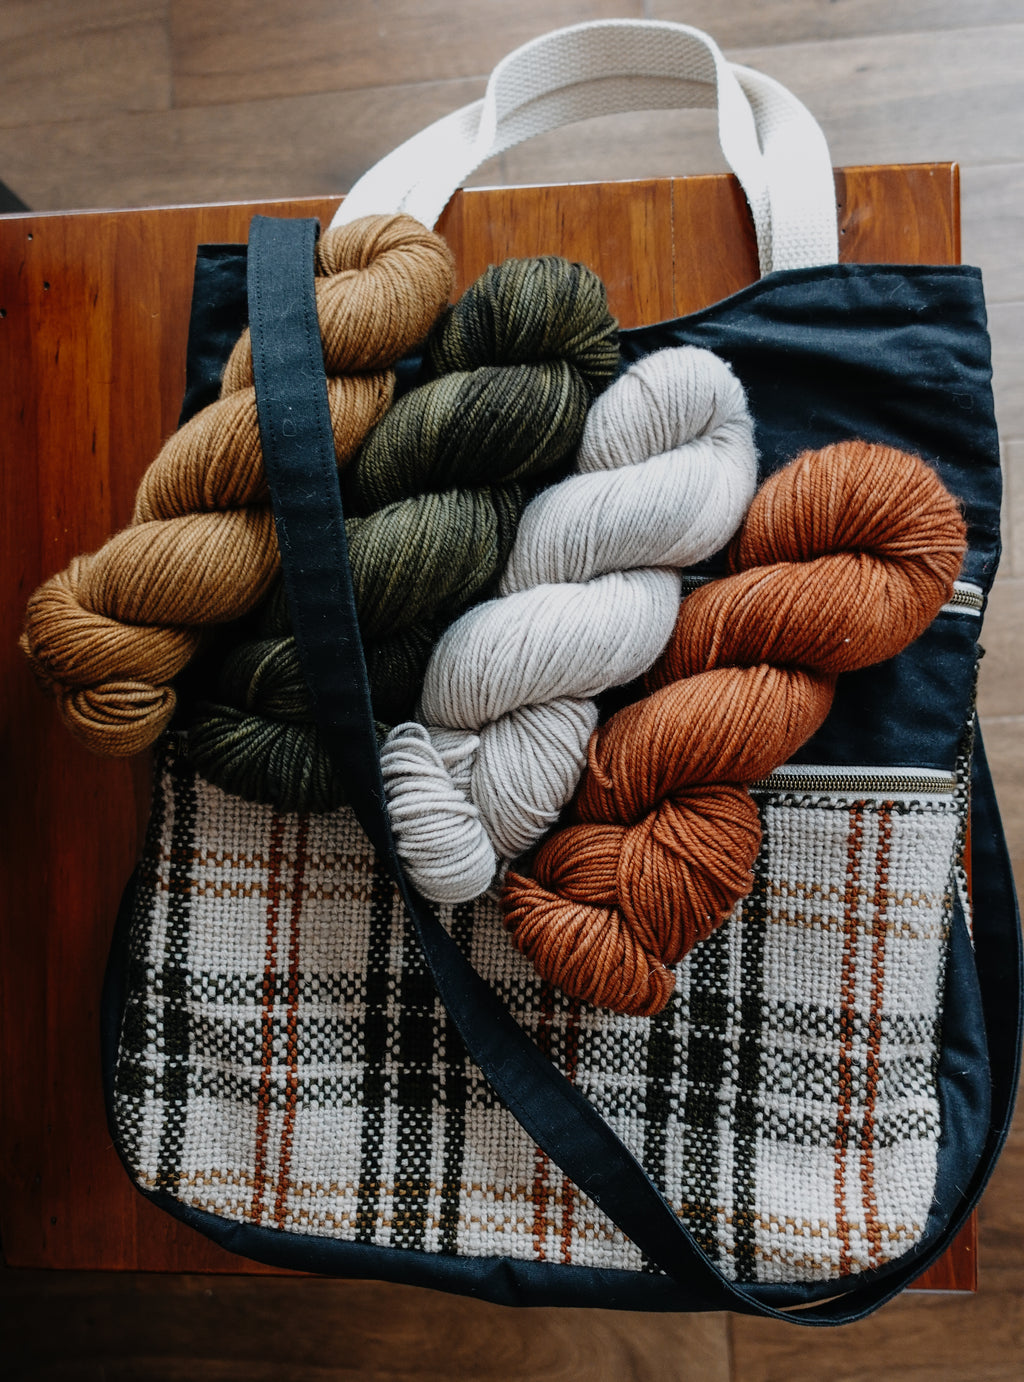 A black canvas and white and orange flannel project bag lays on a chair. Four skeins of yarn sit on top, showing they would fit comfortably inside.